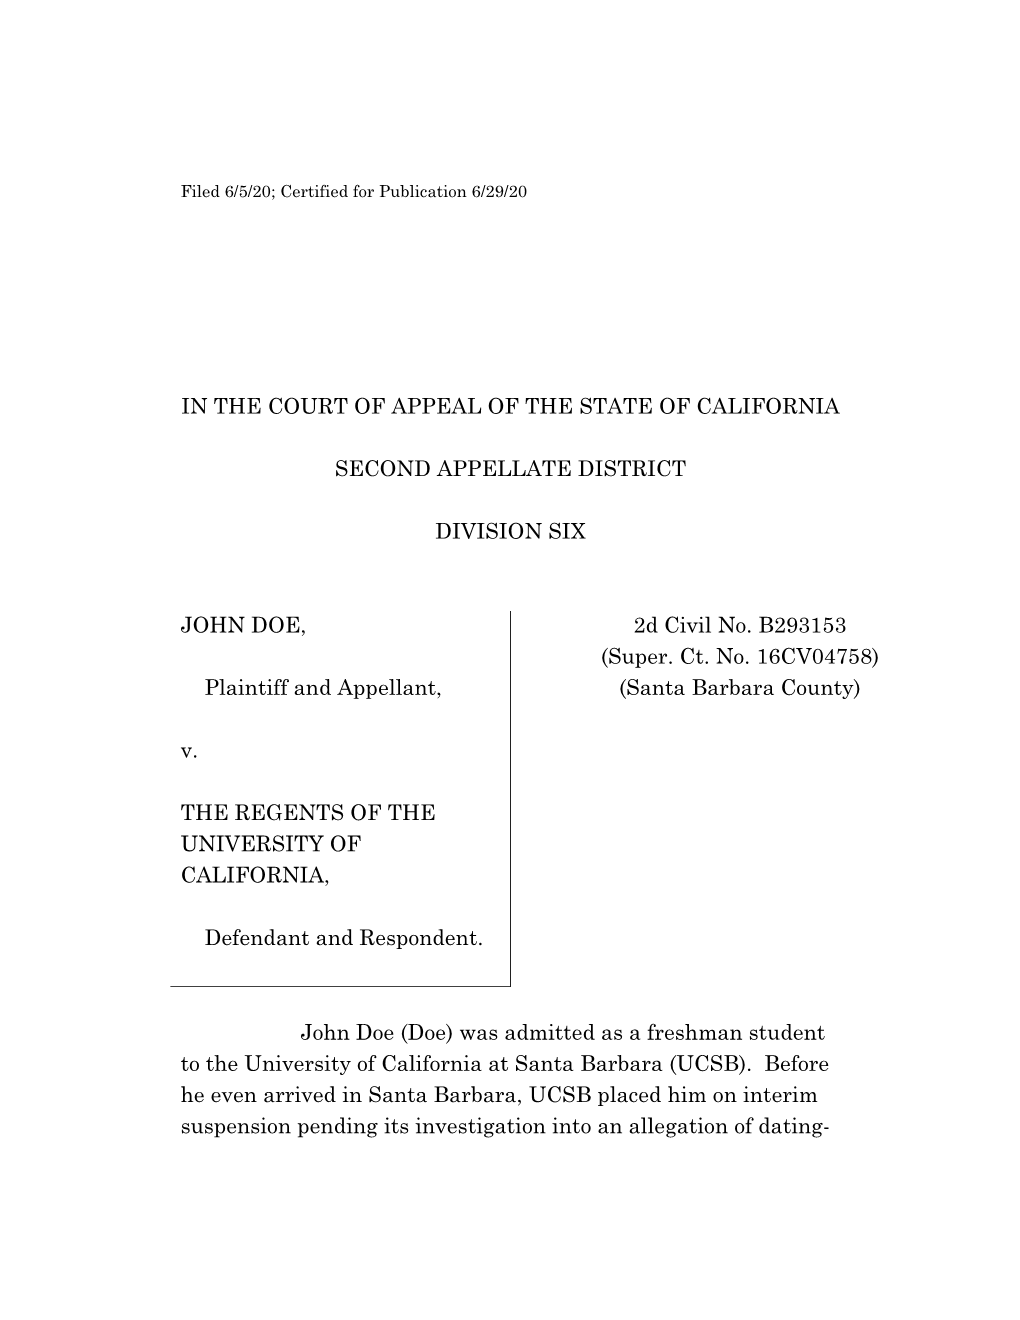 IN the COURT of APPEAL of the STATE of CALIFORNIA SECOND APPELLATE DISTRICT DIVISION SIX JOHN DOE, Plaintiff and Appellant, V. T